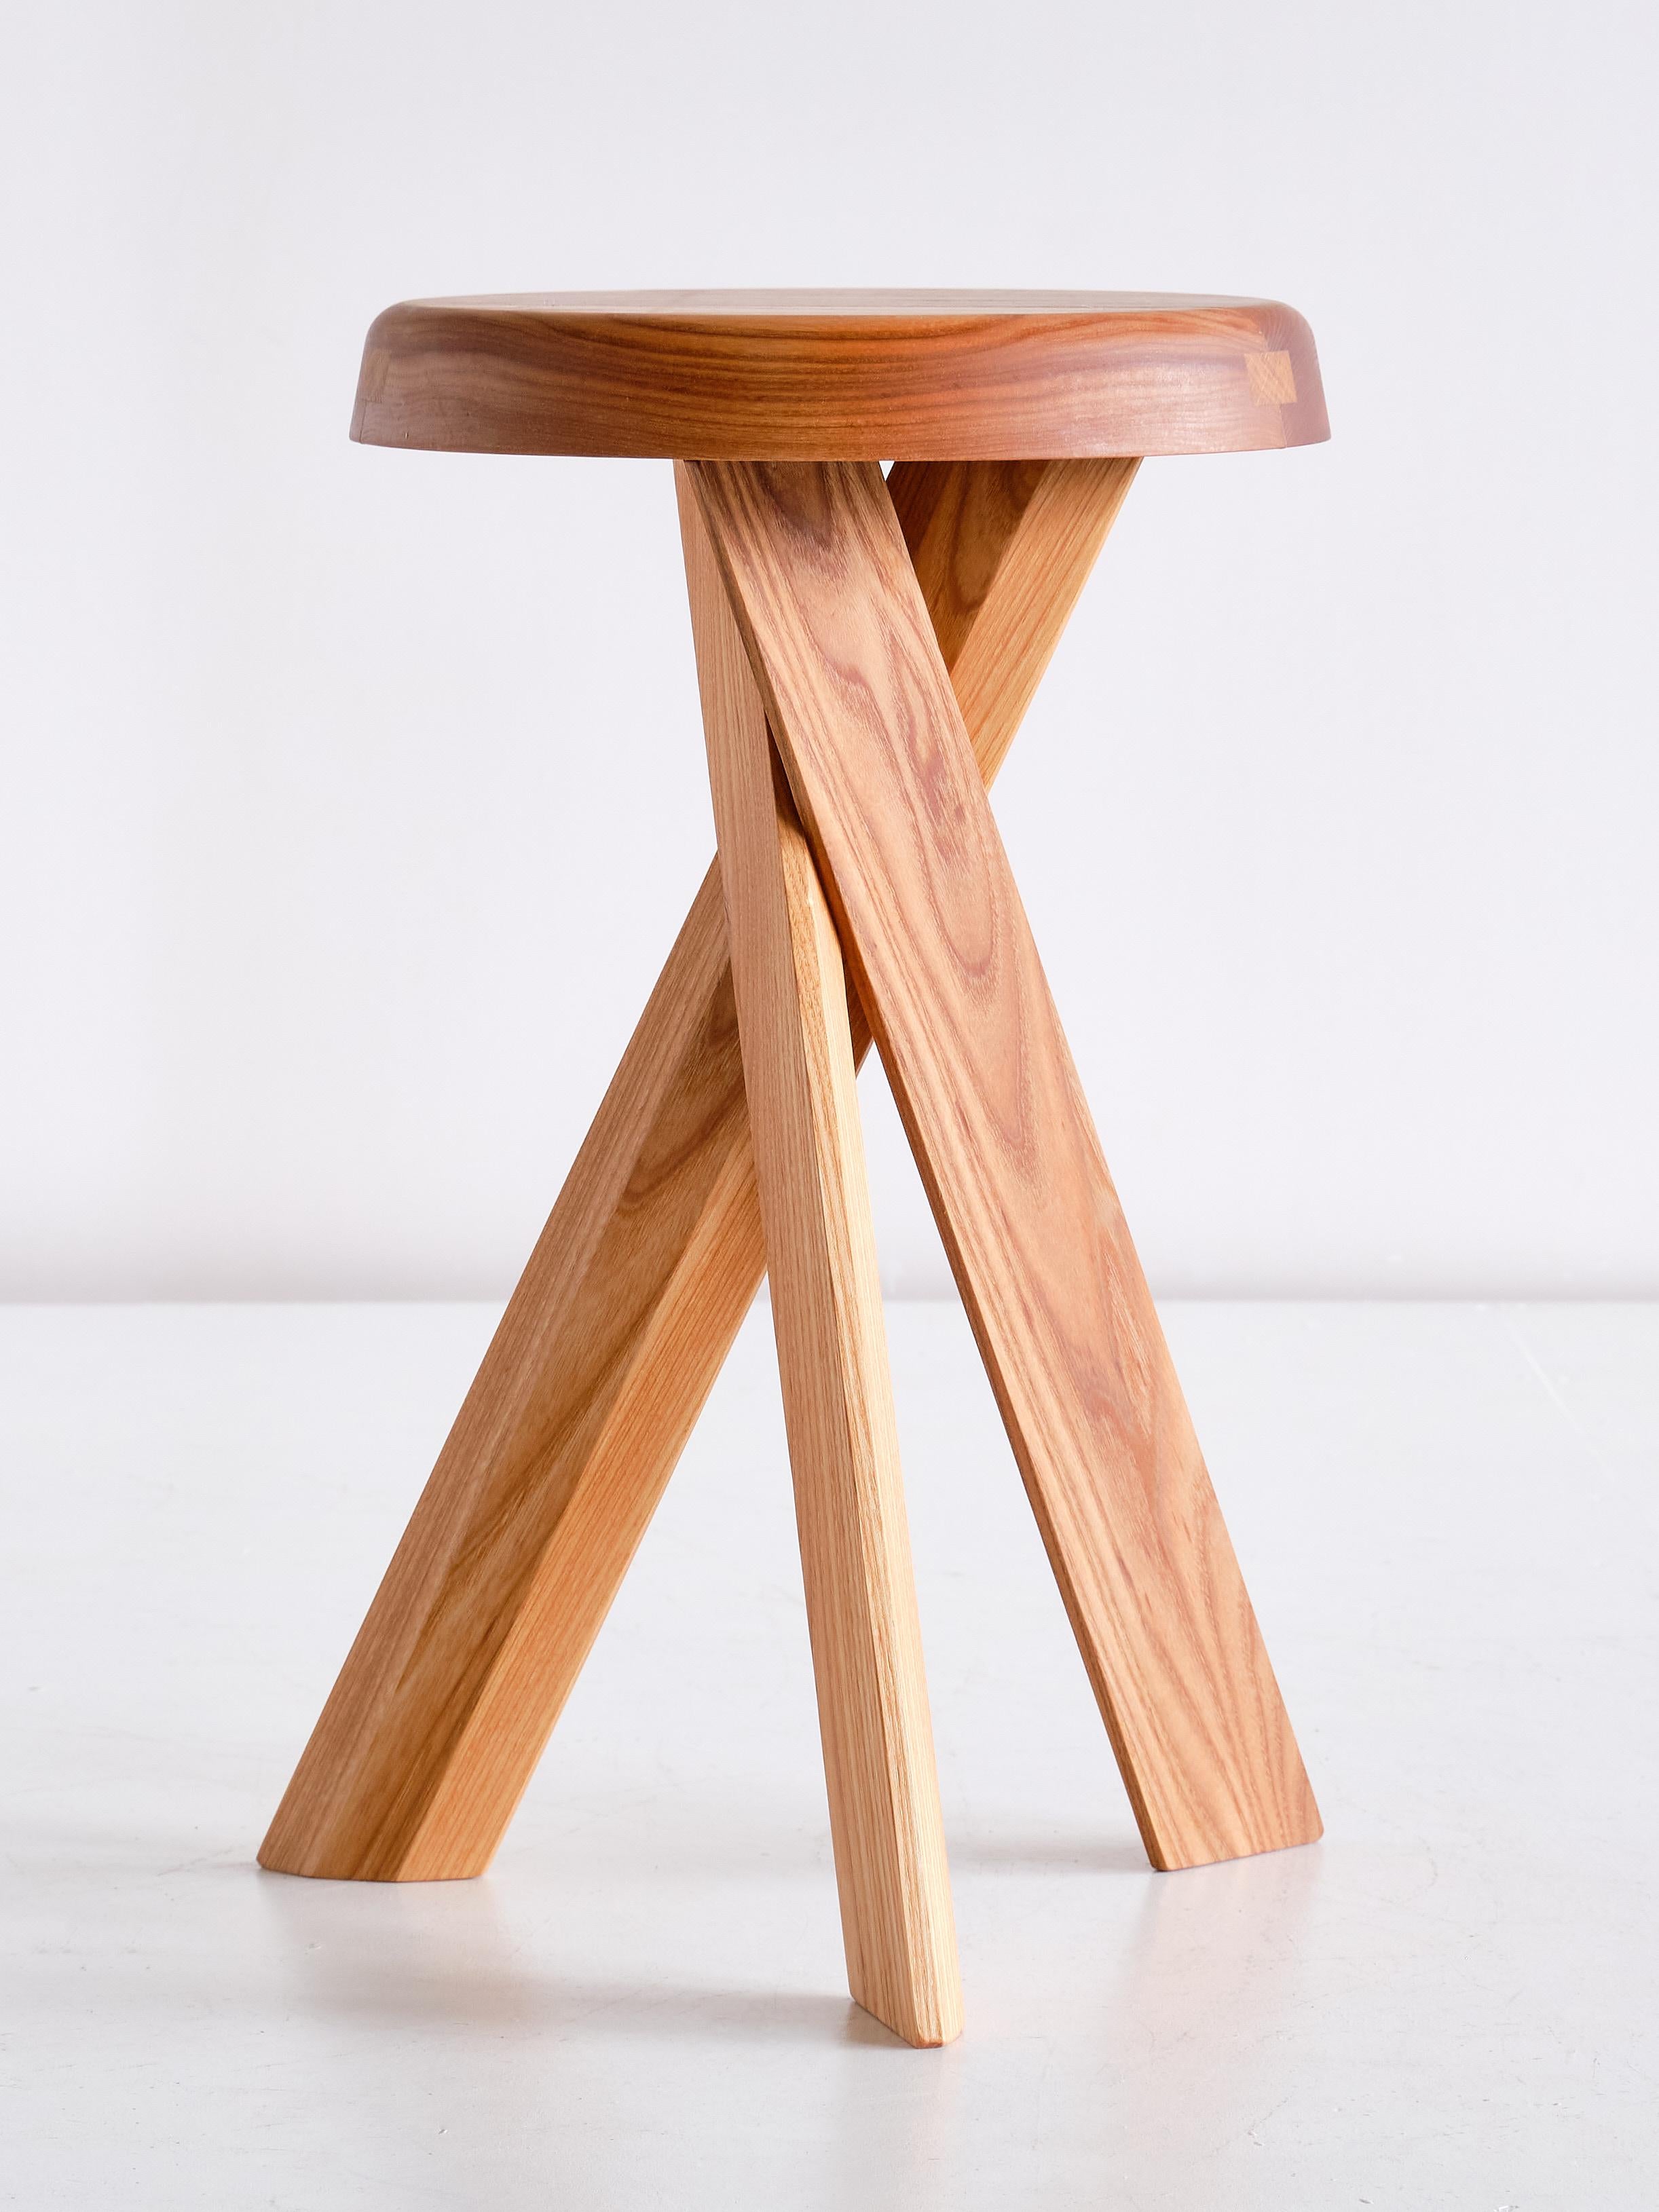 Contemporary Pierre Chapo S31B Stool in Solid Elm, Chapo Creation, France